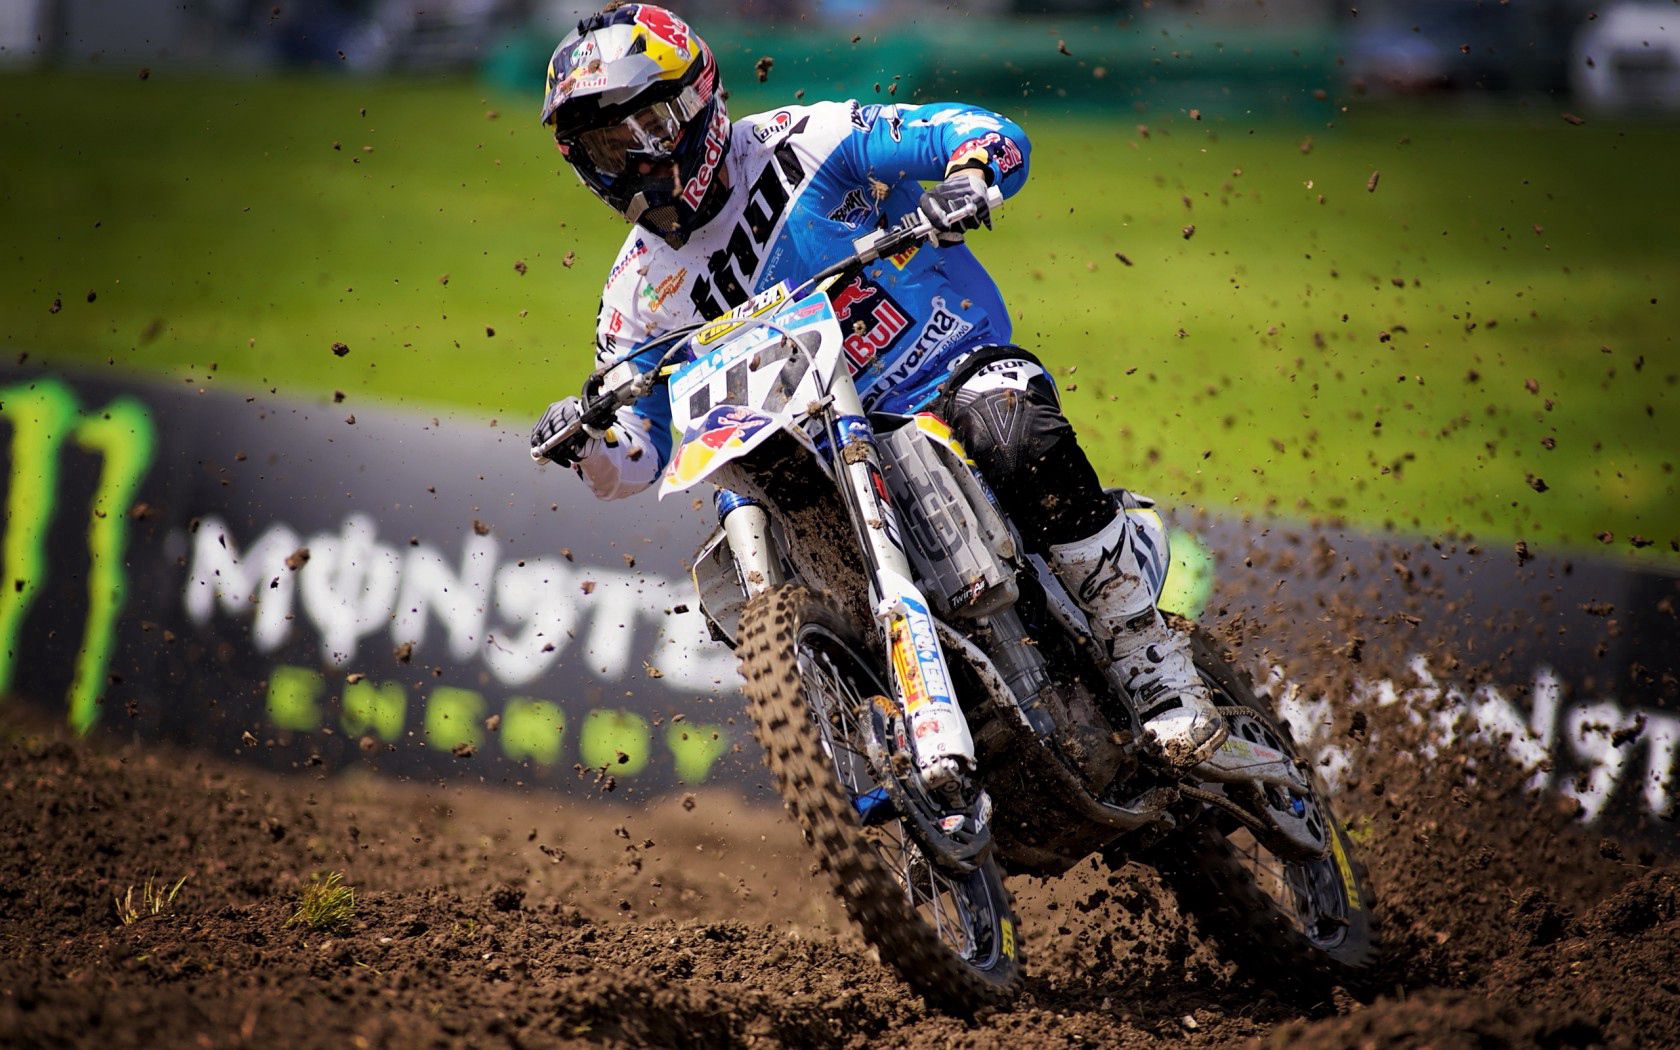 motorcyclist, motorcycles, motorcycle, mud, dirt, race